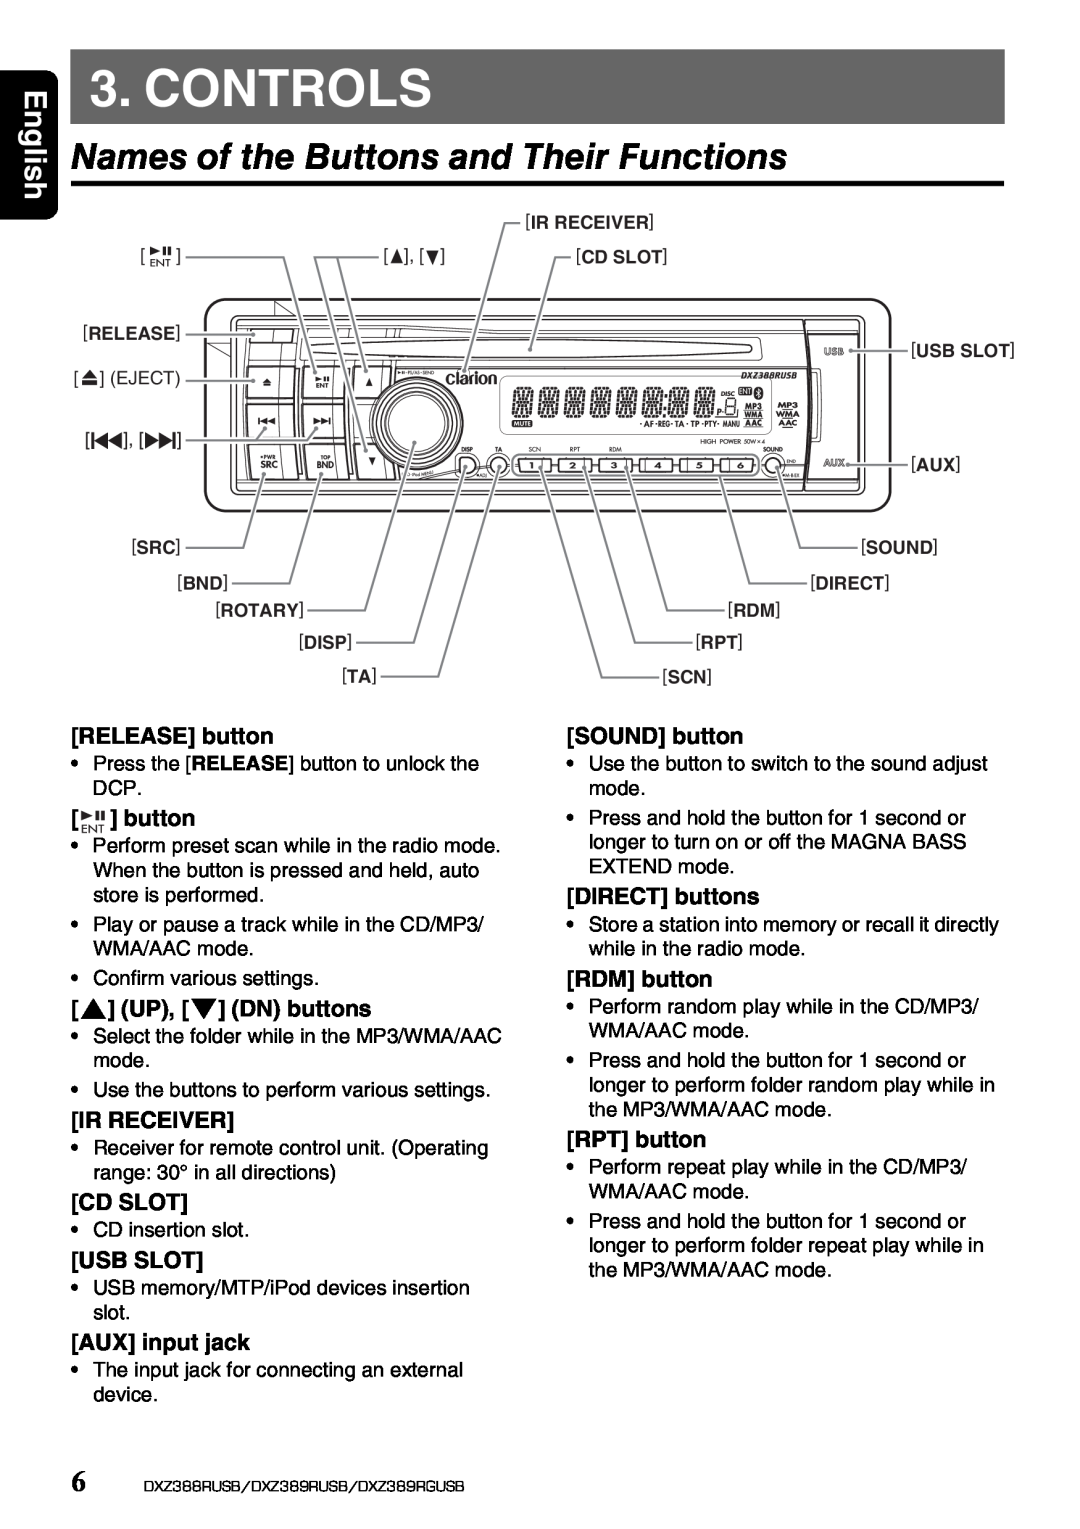 Clarion DXZ389RGUSB, DXZ389RUSB, DXZ388RUSB owner manual Controls, Names of the Buttons and Their Functions, English 